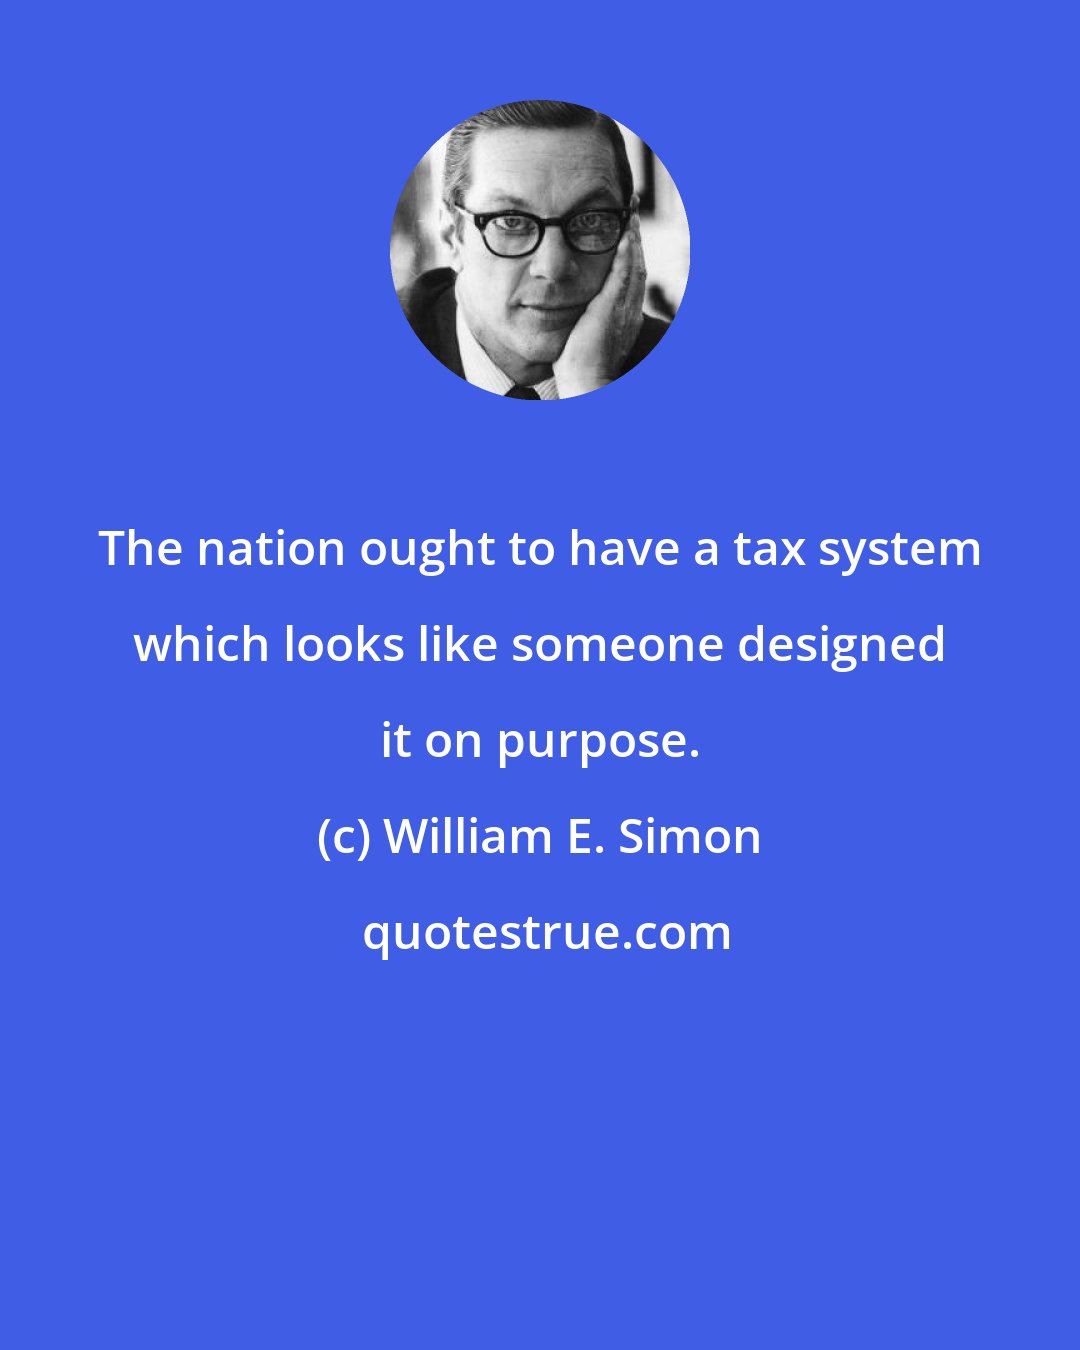 William E. Simon: The nation ought to have a tax system which looks like someone designed it on purpose.